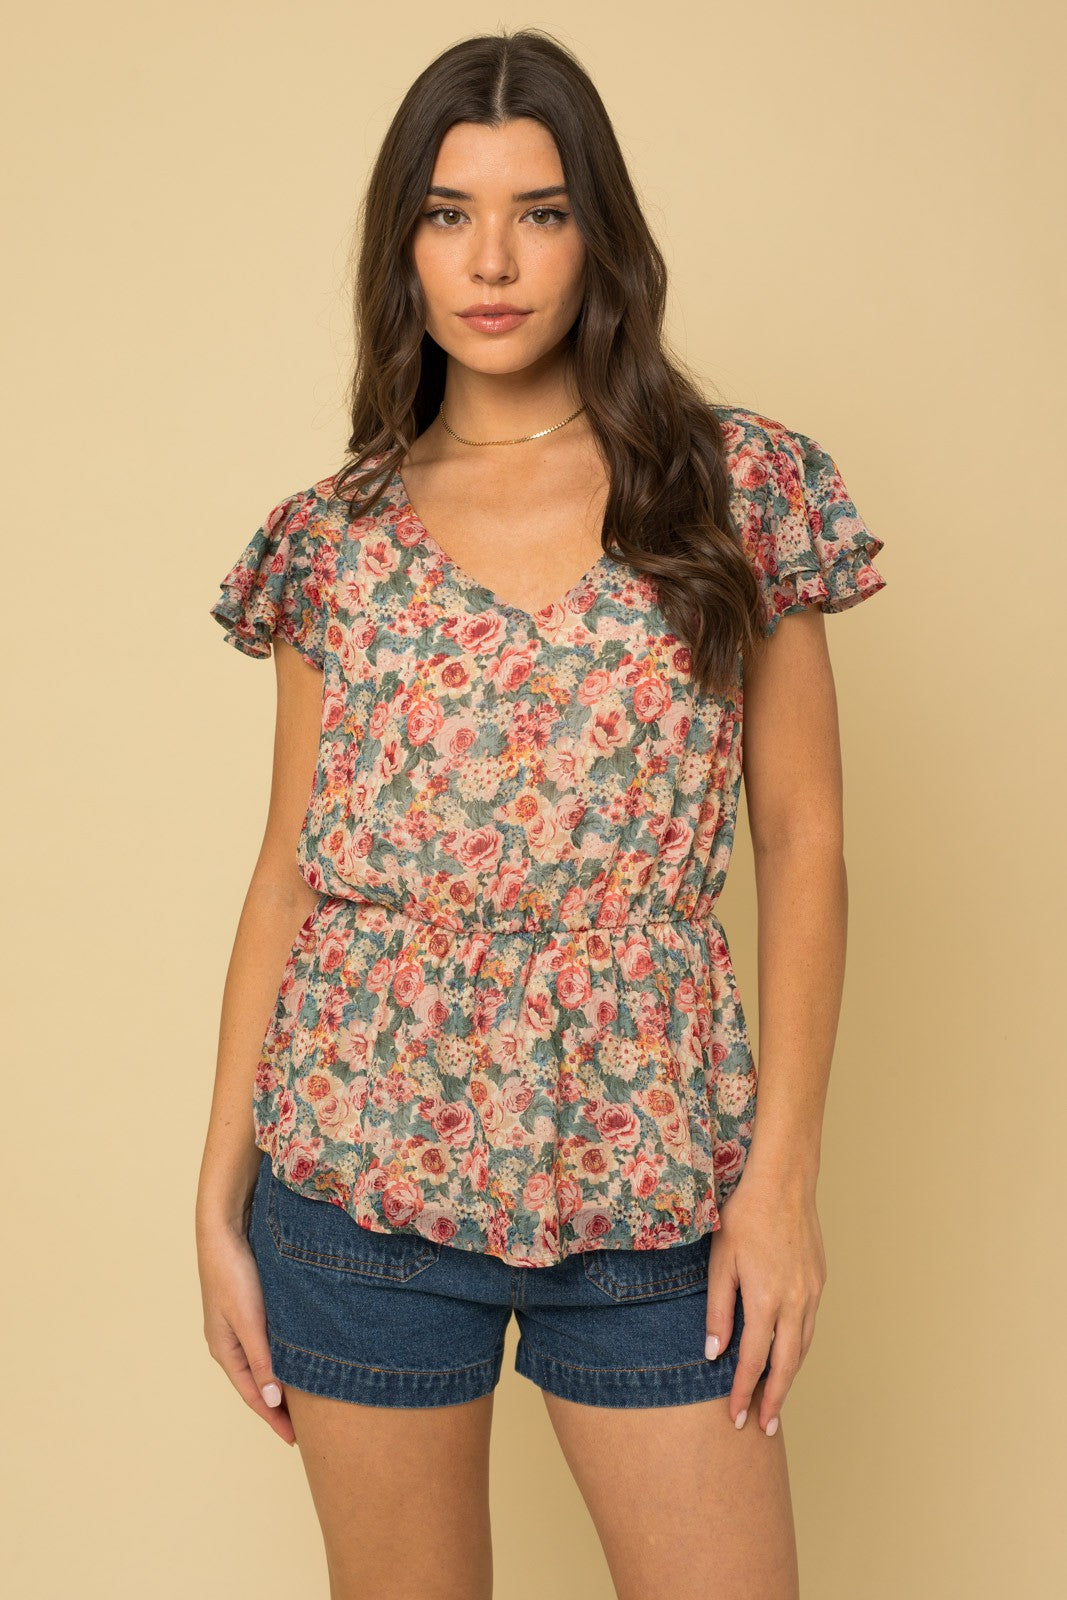 Muted Floral Peplum Style Summer Top